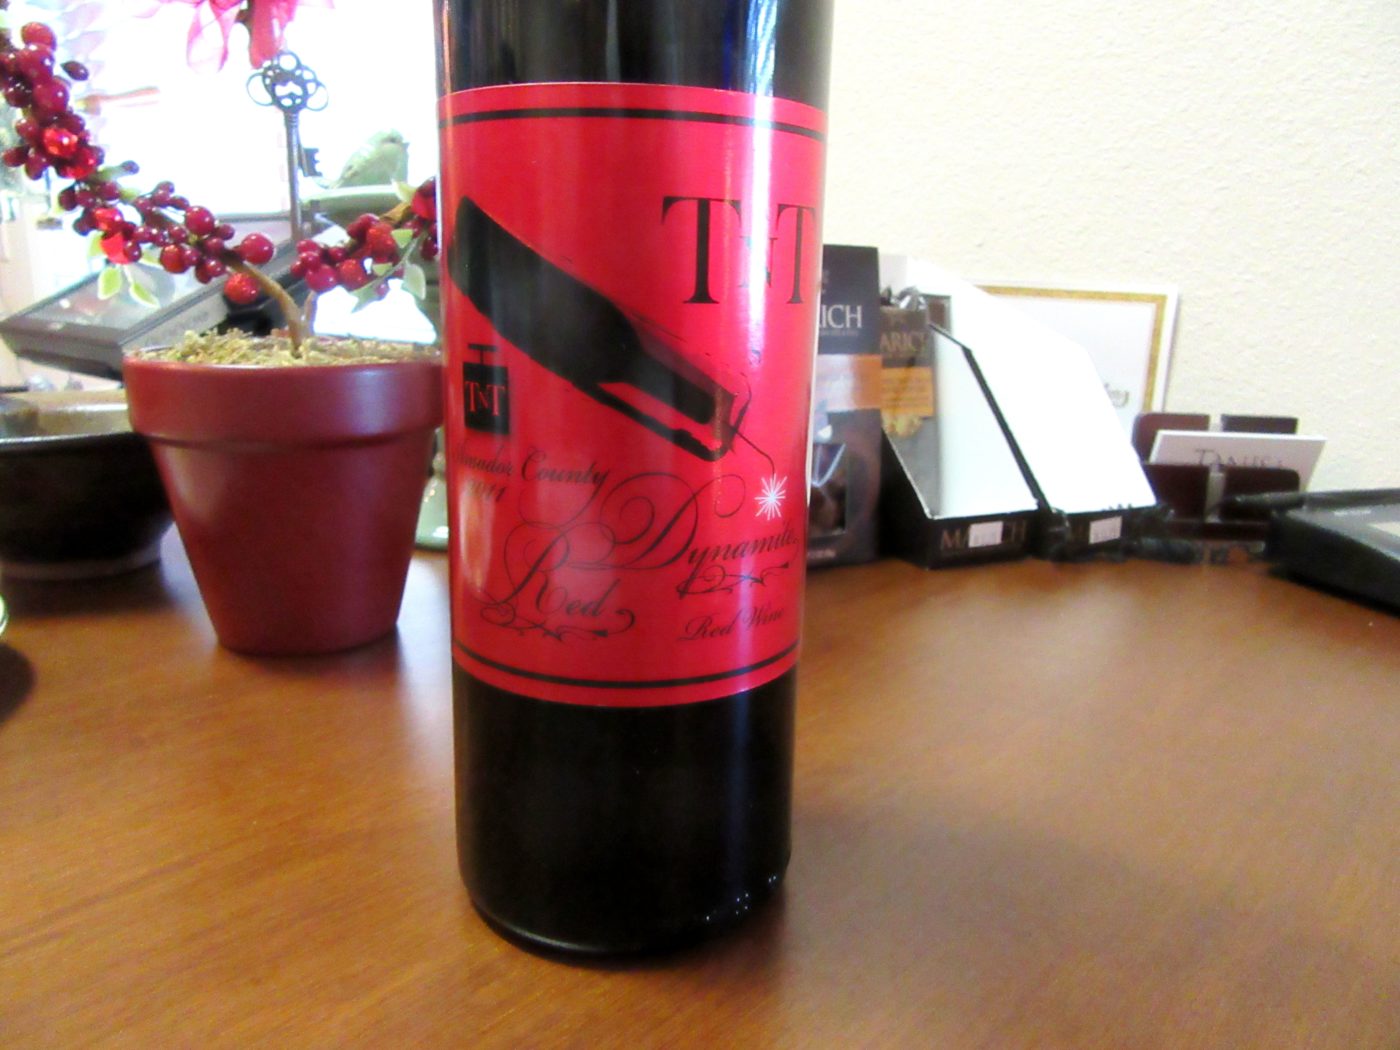 Tanis Vineyards, TNT Dynamite Red 2011, Amador County, California, Wine Casual